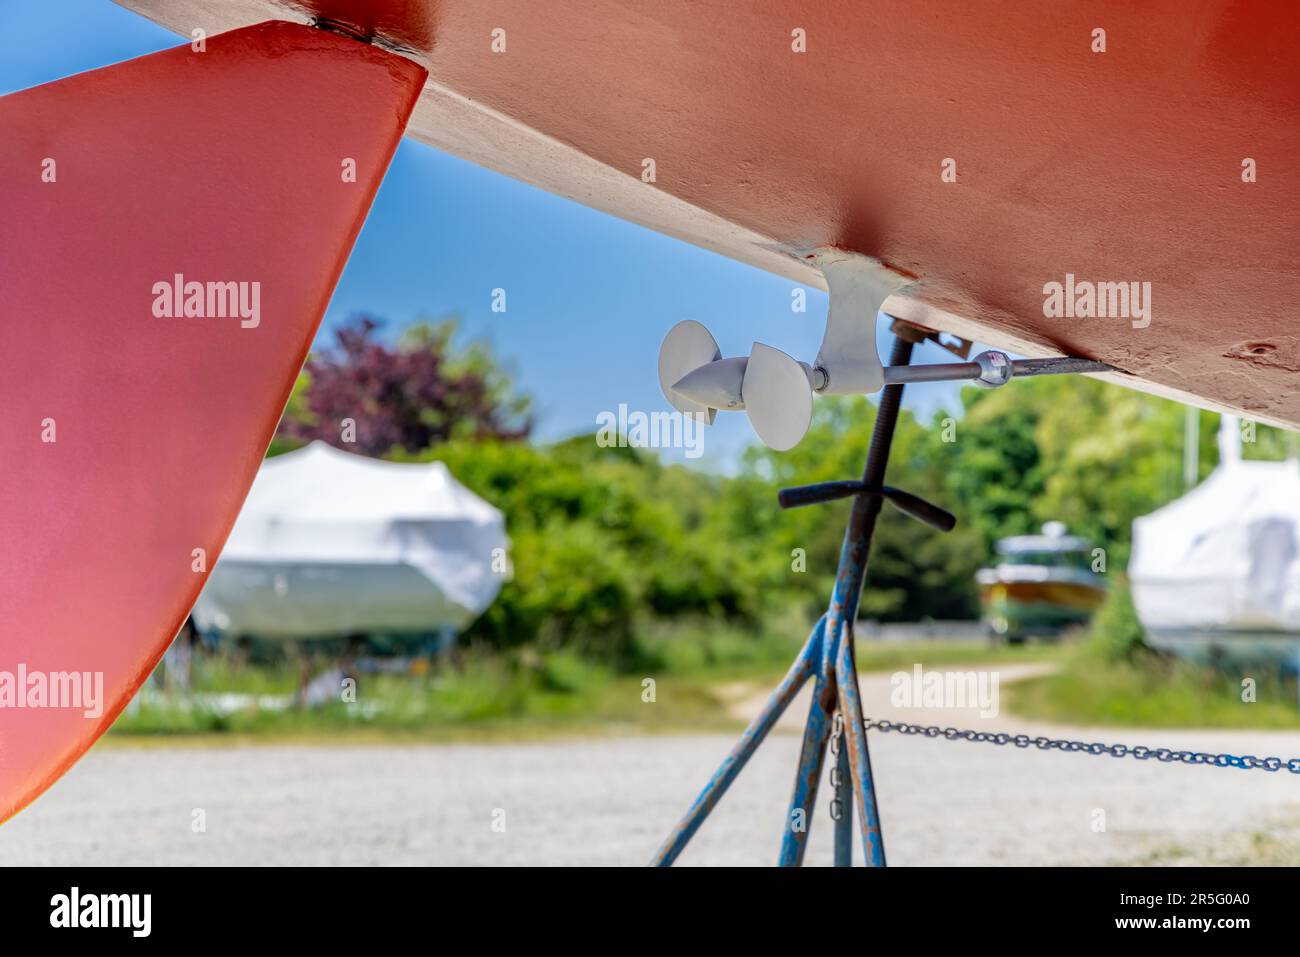 Detail image of the prop and rudder on a sail boat out of the water Stock Photo